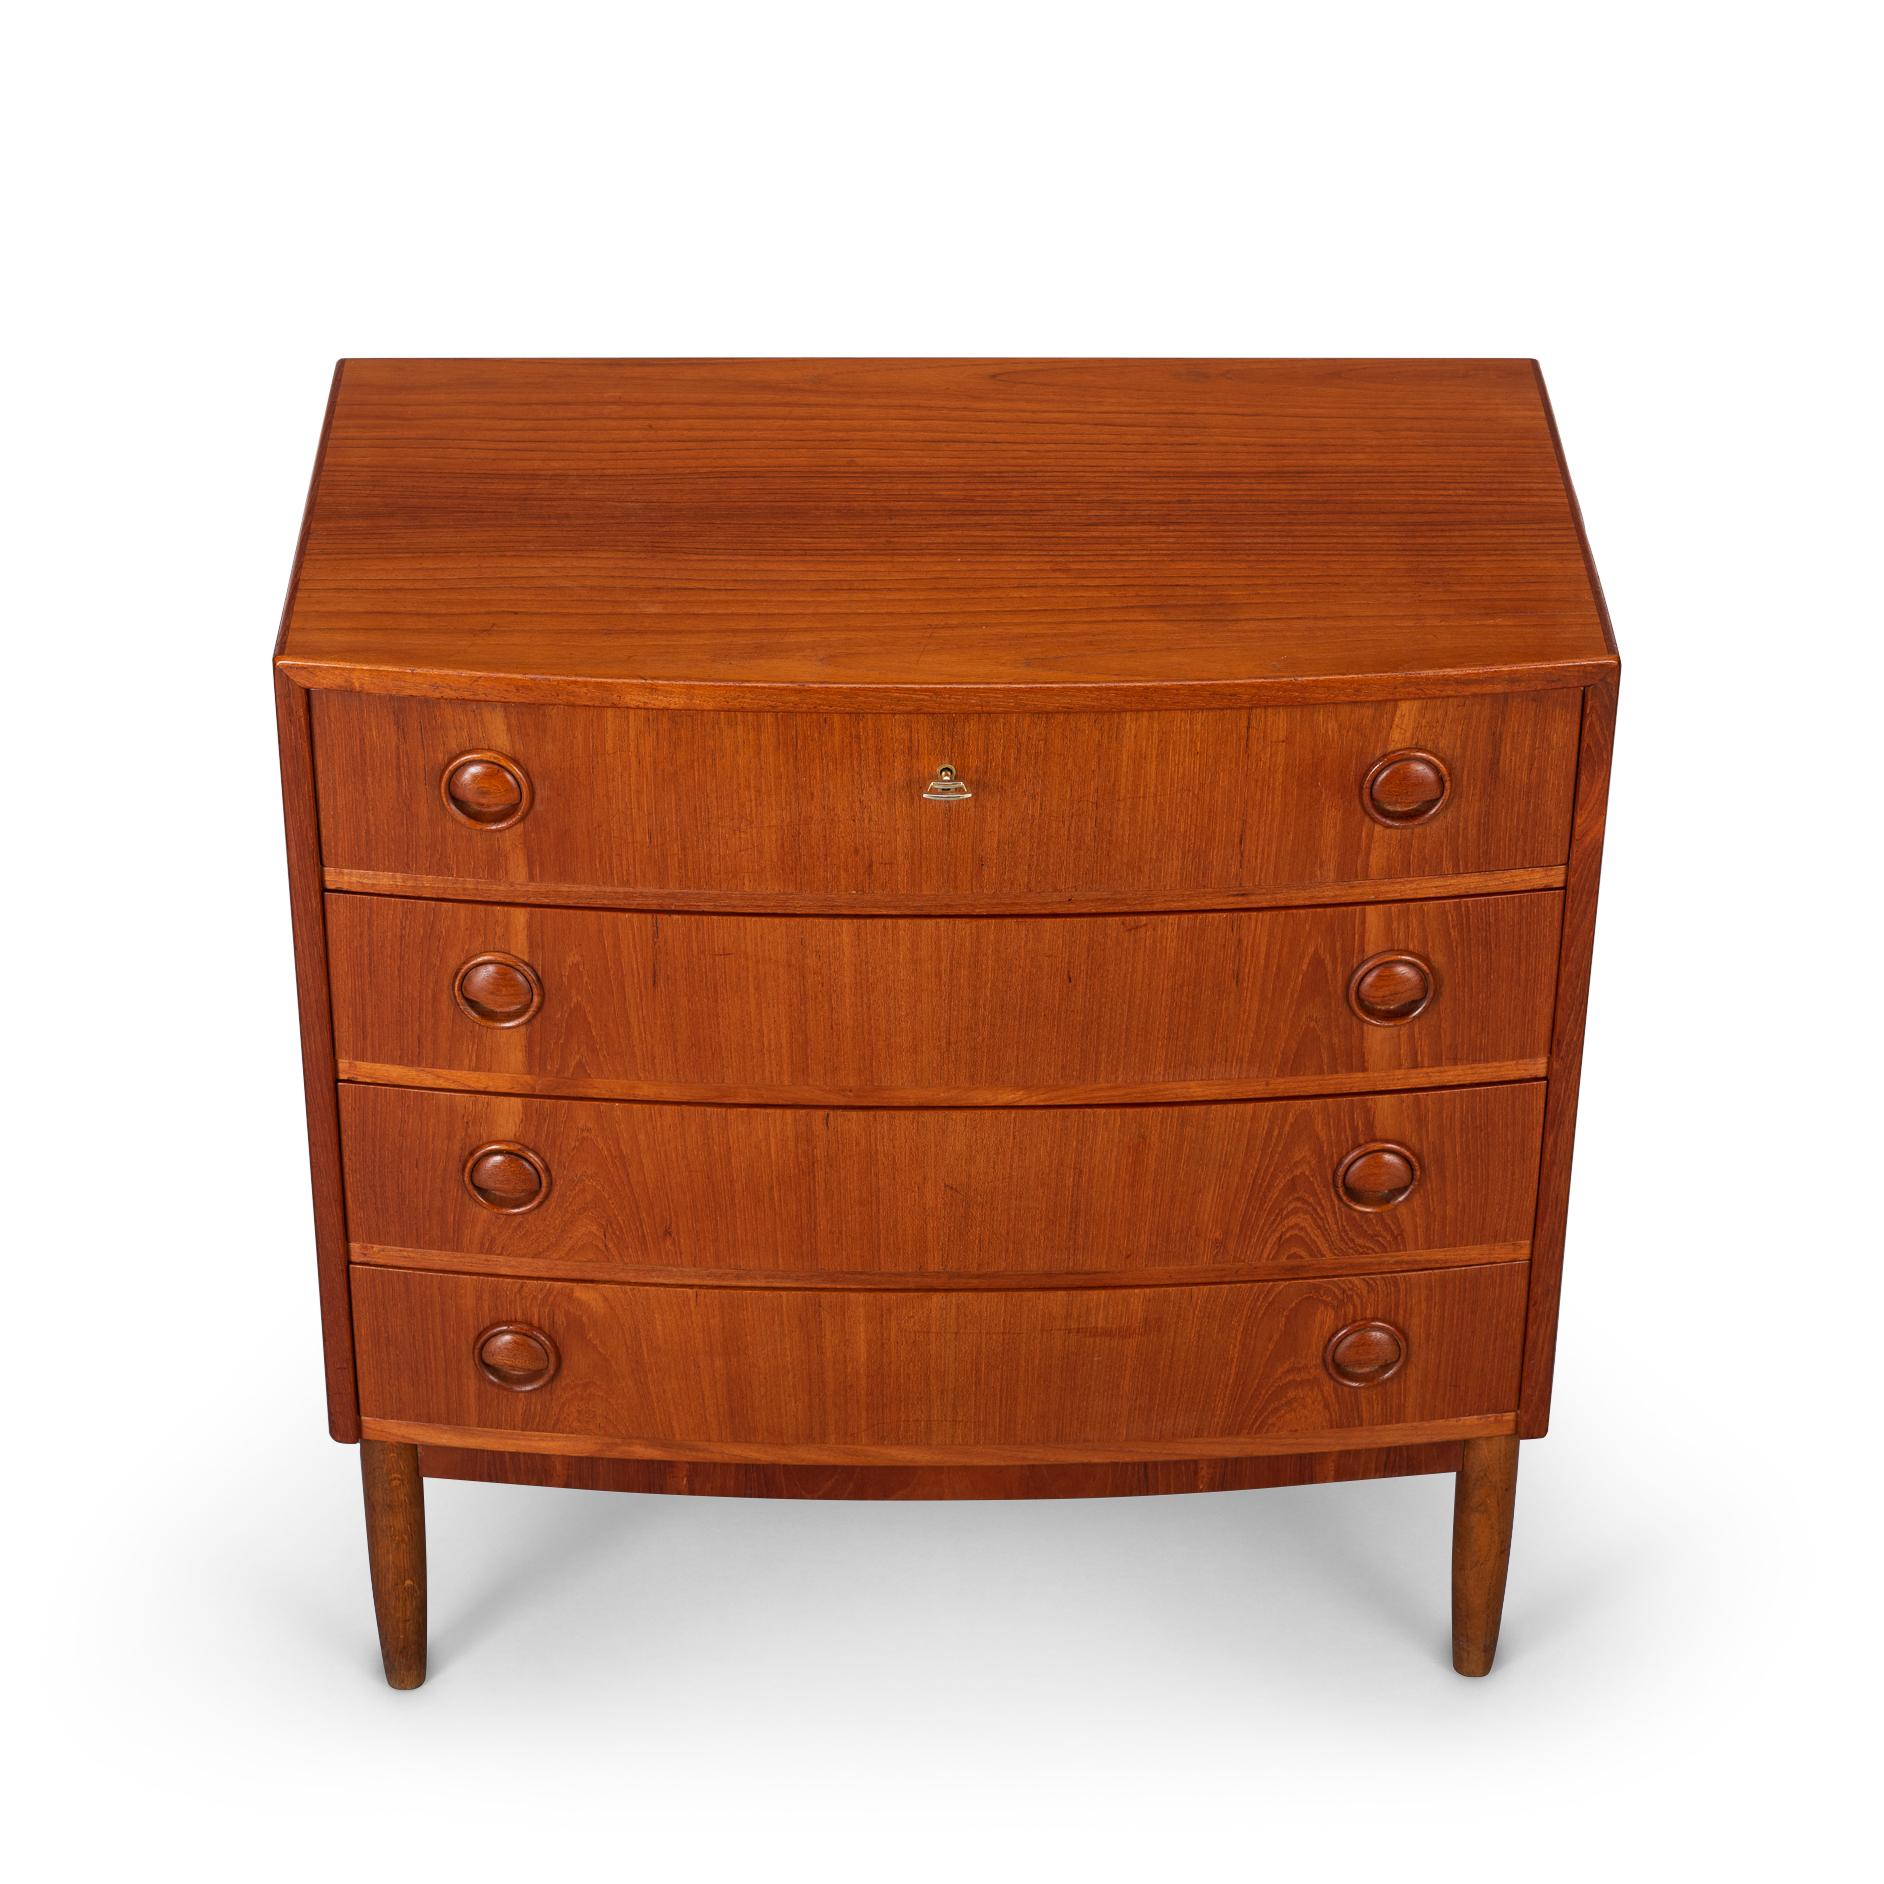 This Danish well fed shaped vintage chest of drawers in teak veneer was made in the early 60s. Four curved drawers with special round handles, so very characteristic of the time, provide the allround sixties look. Top drawer can be locked at your